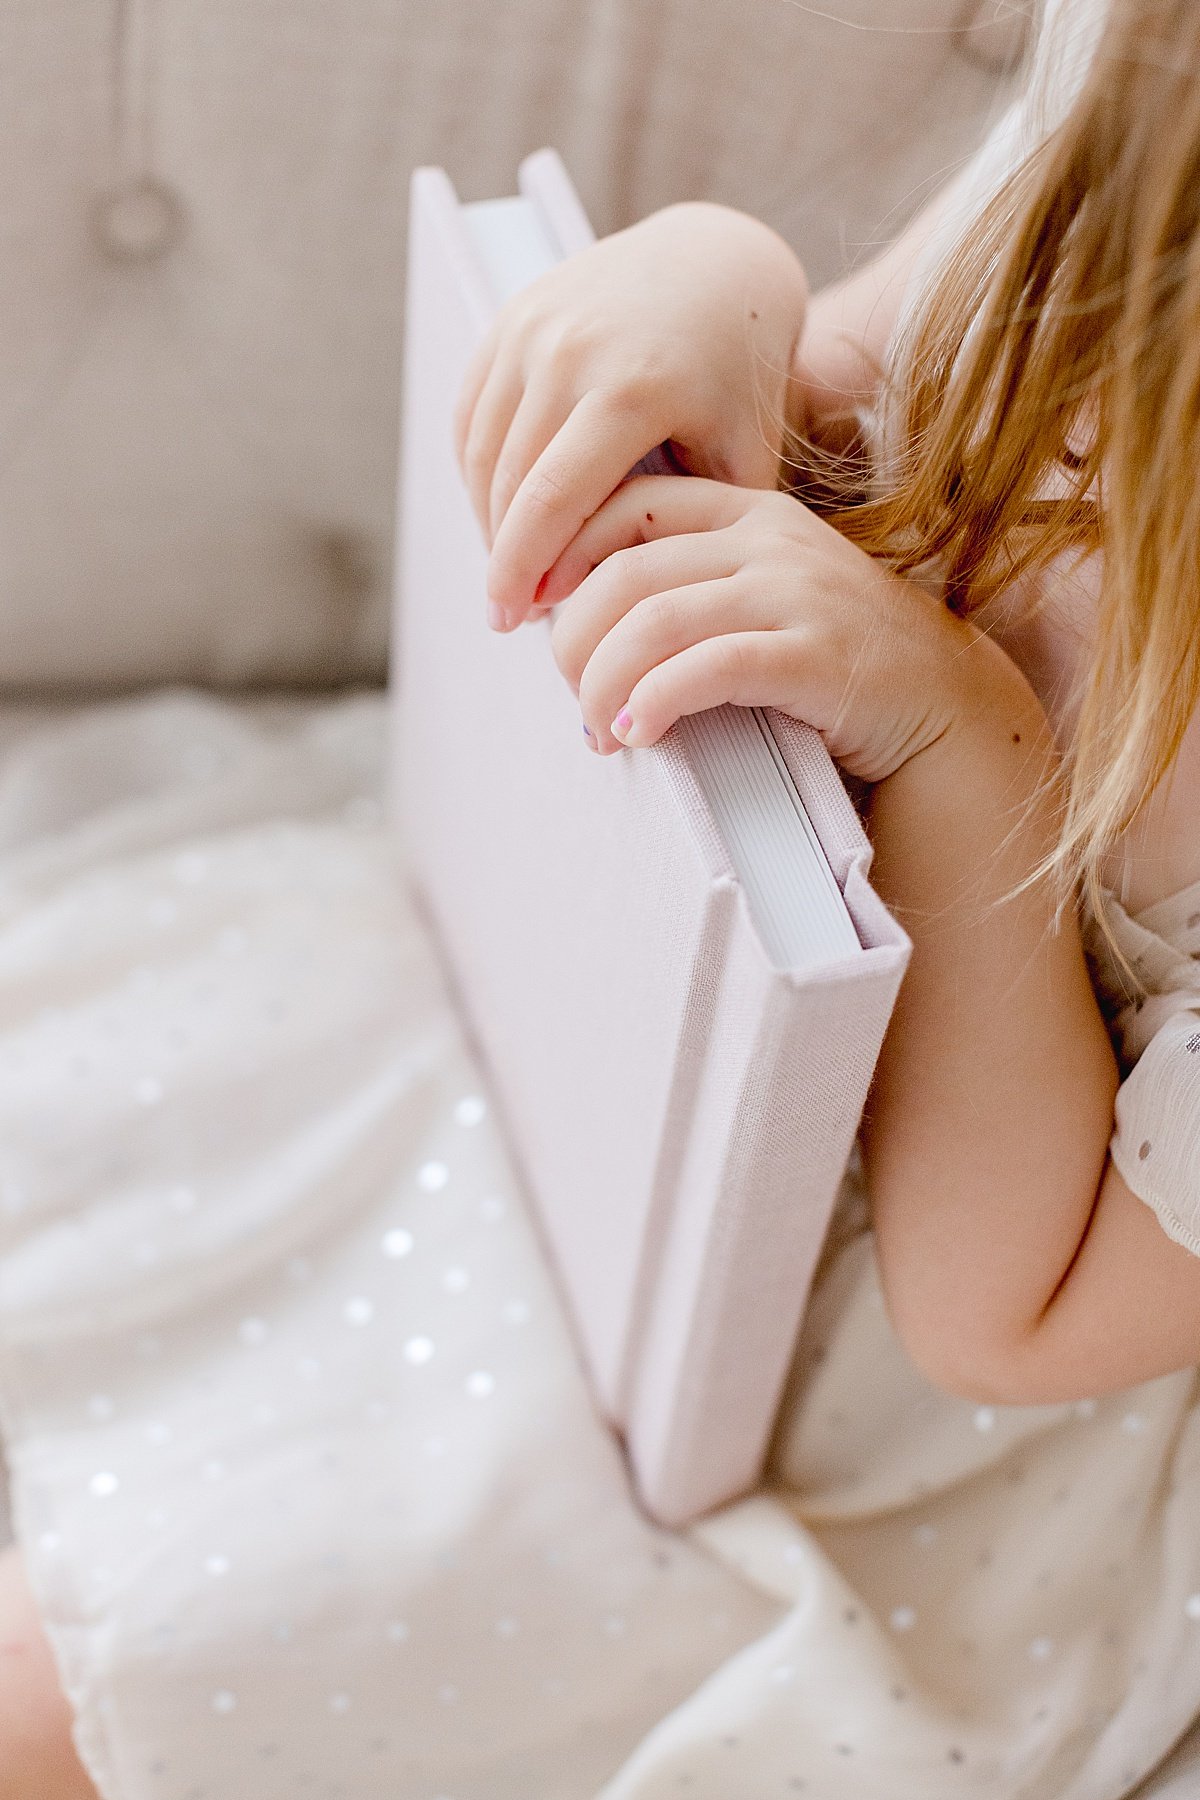 Little Child holds her family heirloom book in a glittery white dress | Ambre Williams Photography Detail Photo